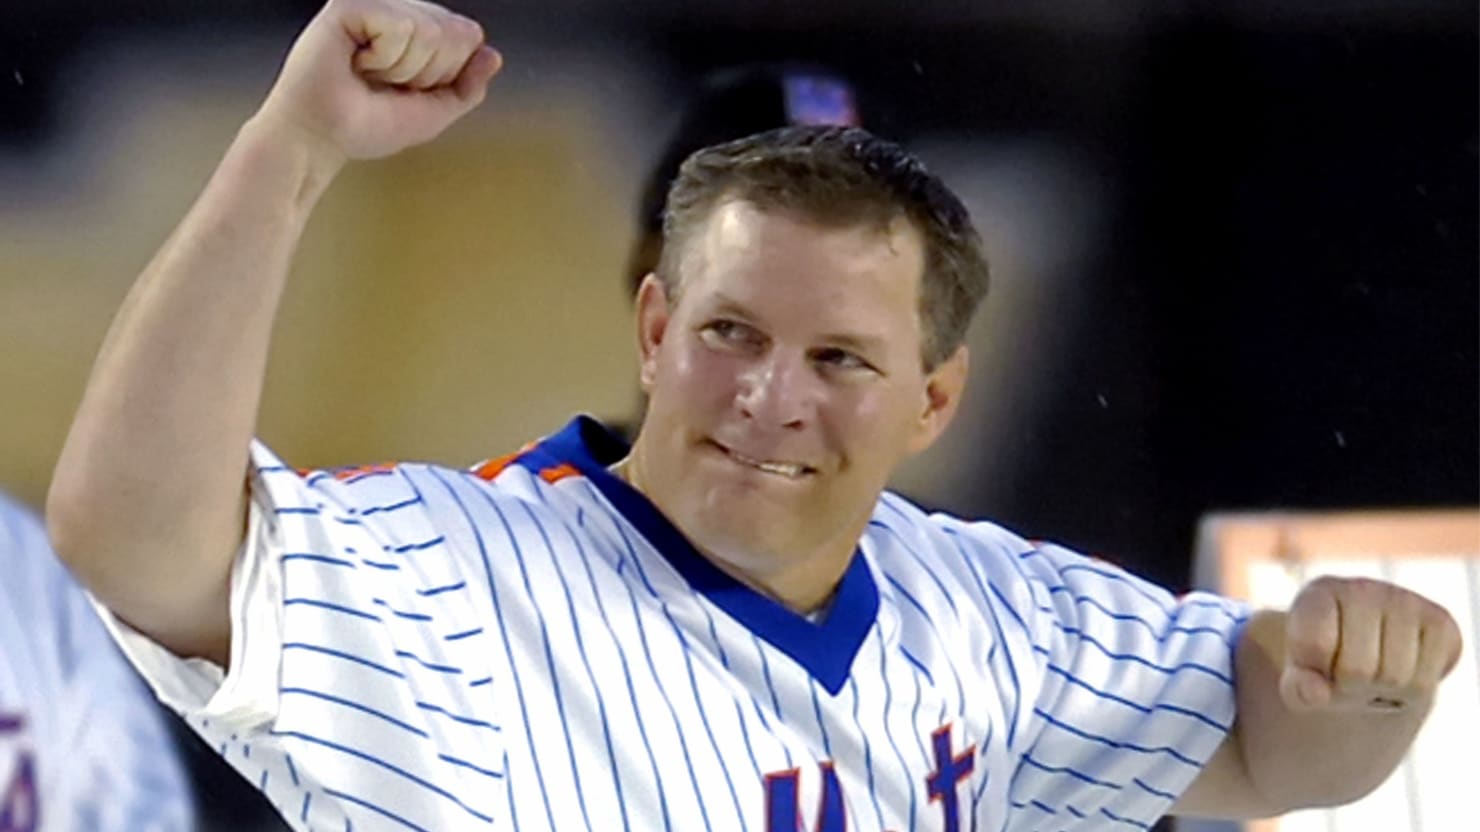 Ron Darling: Lenny Dykstra racially taunted pitcher in '86 World Series